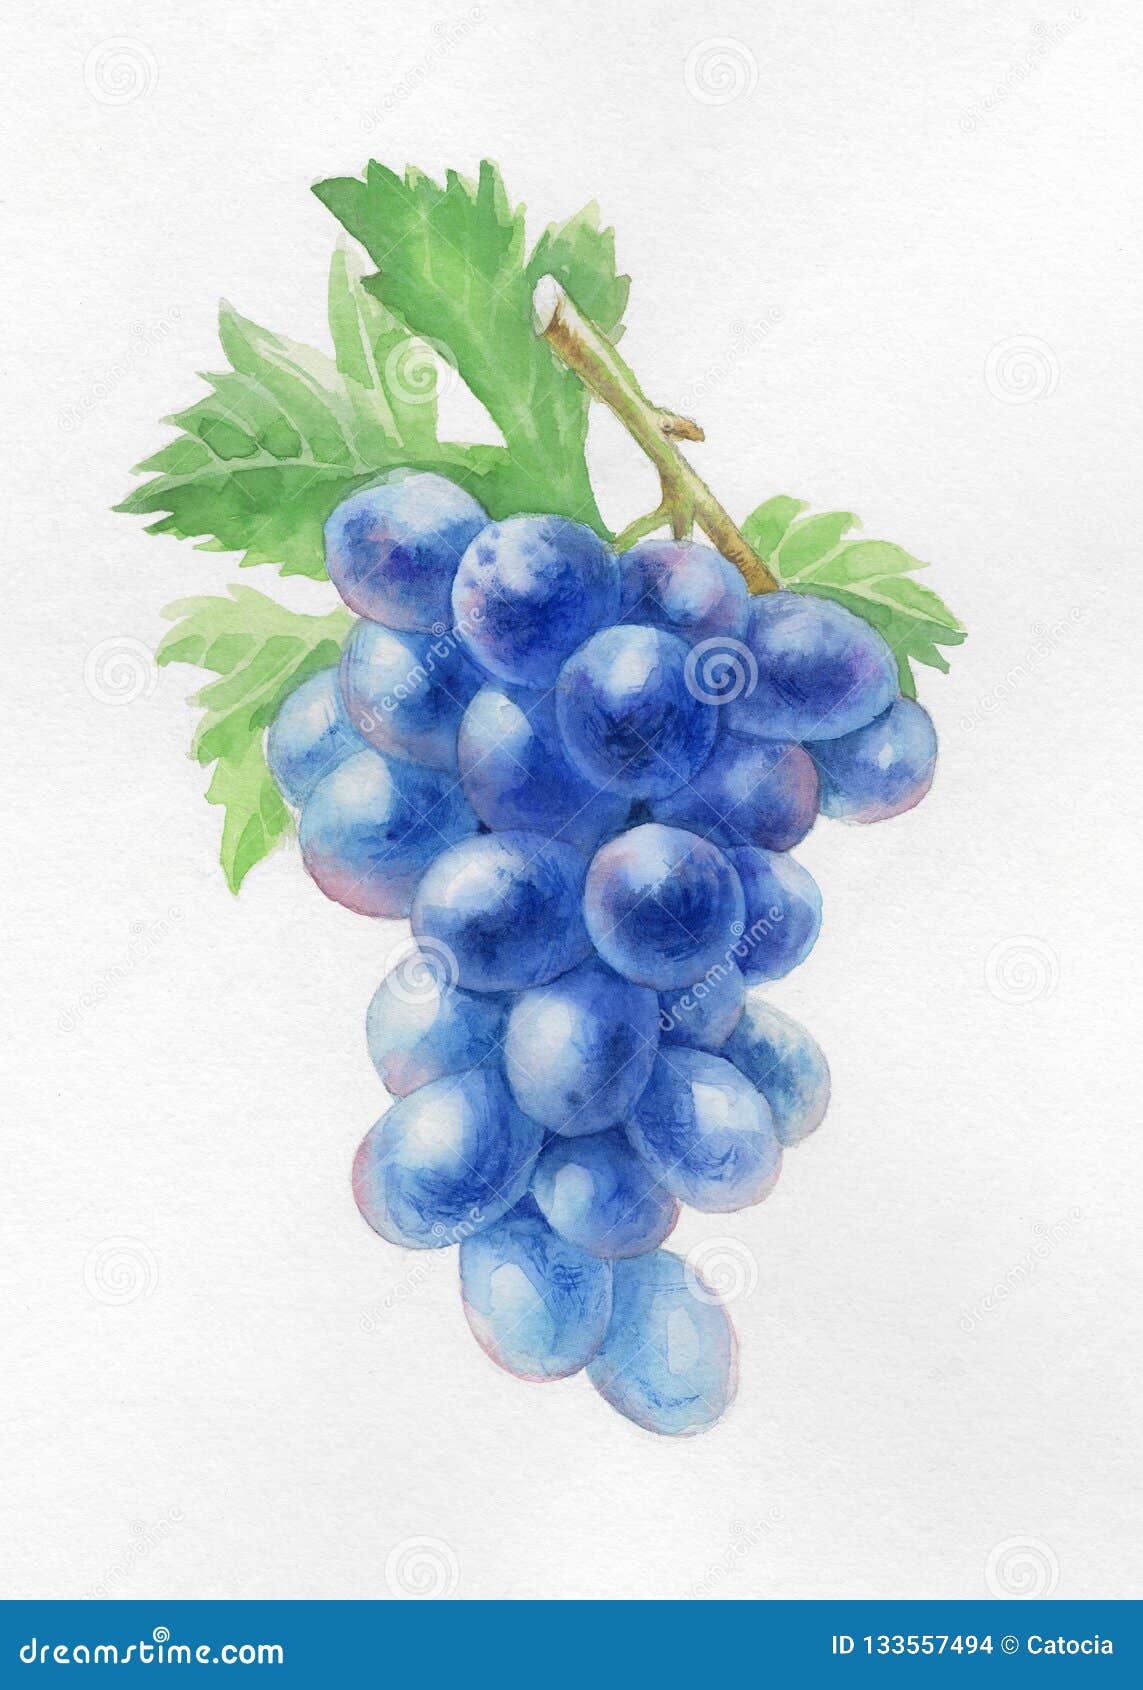 25+ Best Looking For Realistic Bunch Of Grapes Drawing